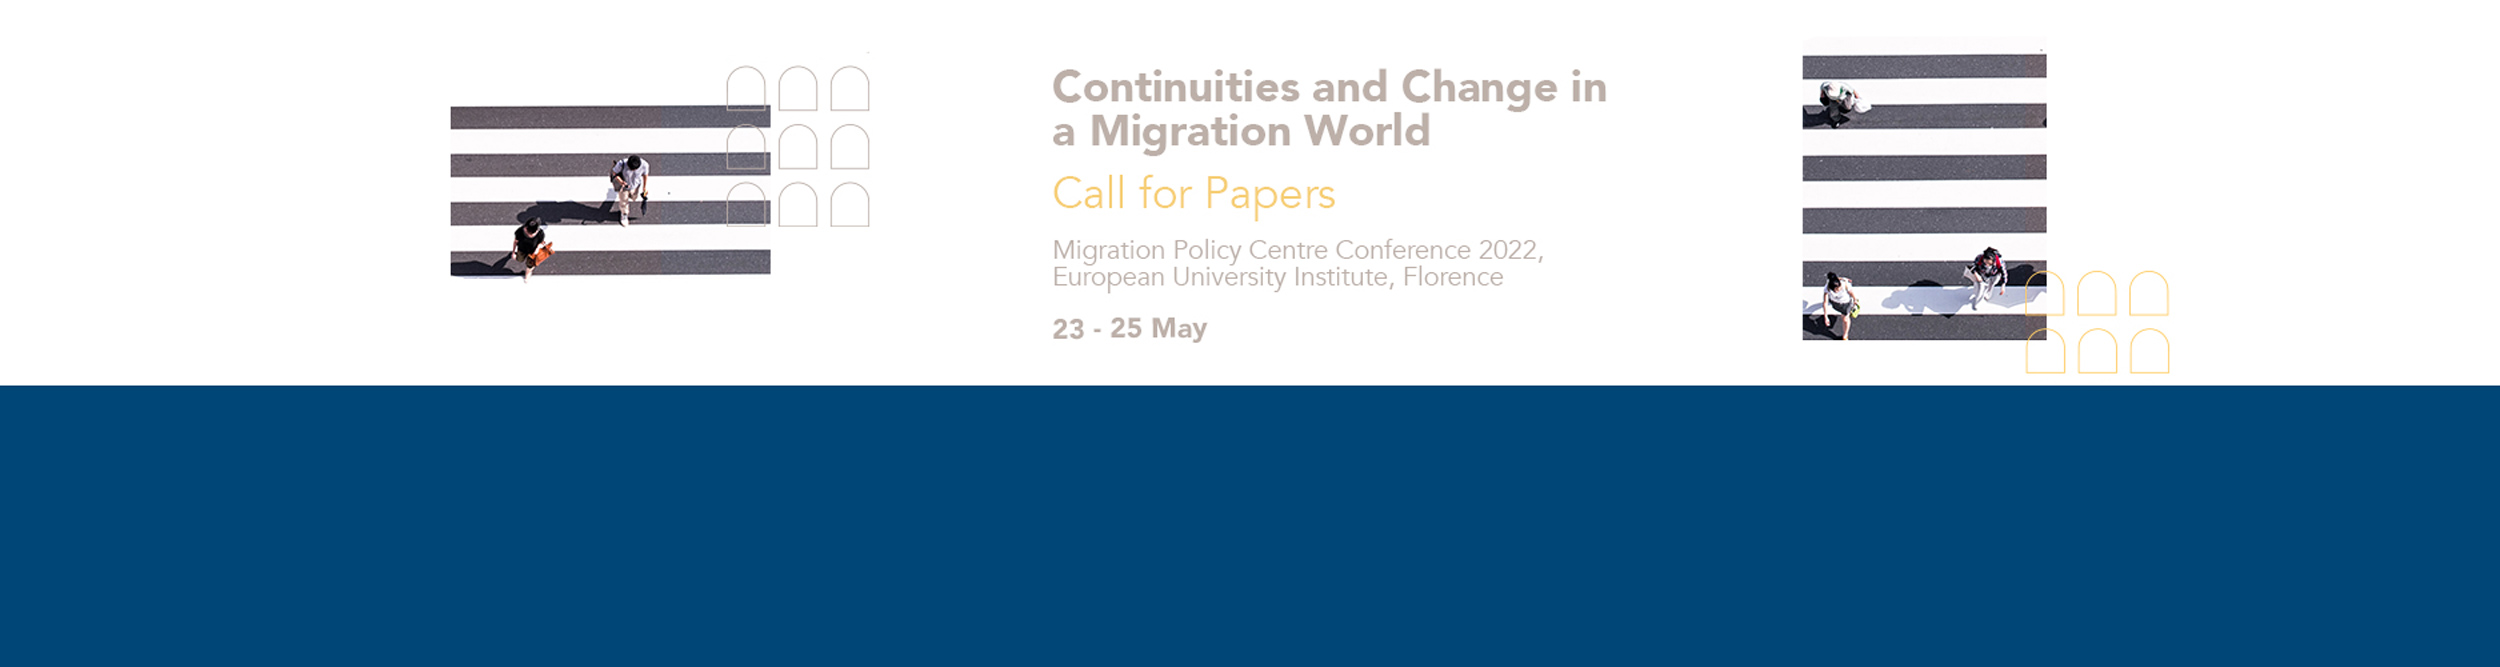 Permalink to:Call for Papers: Continuities and Change in a Migration World